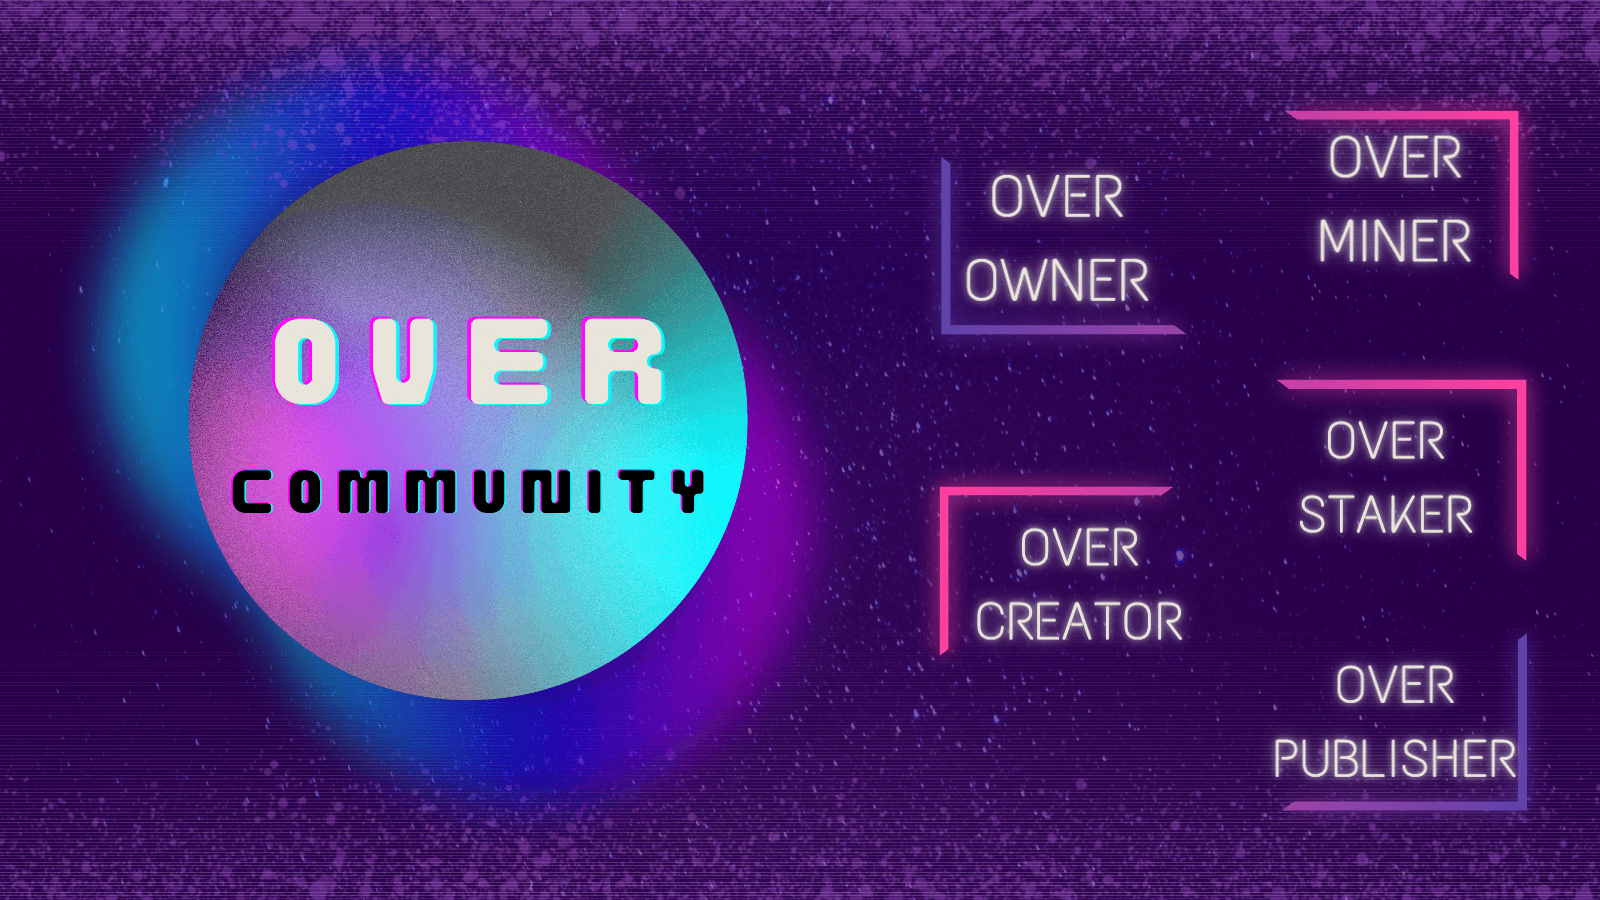 over community includes owners, creators, stakers, publishers, and miners